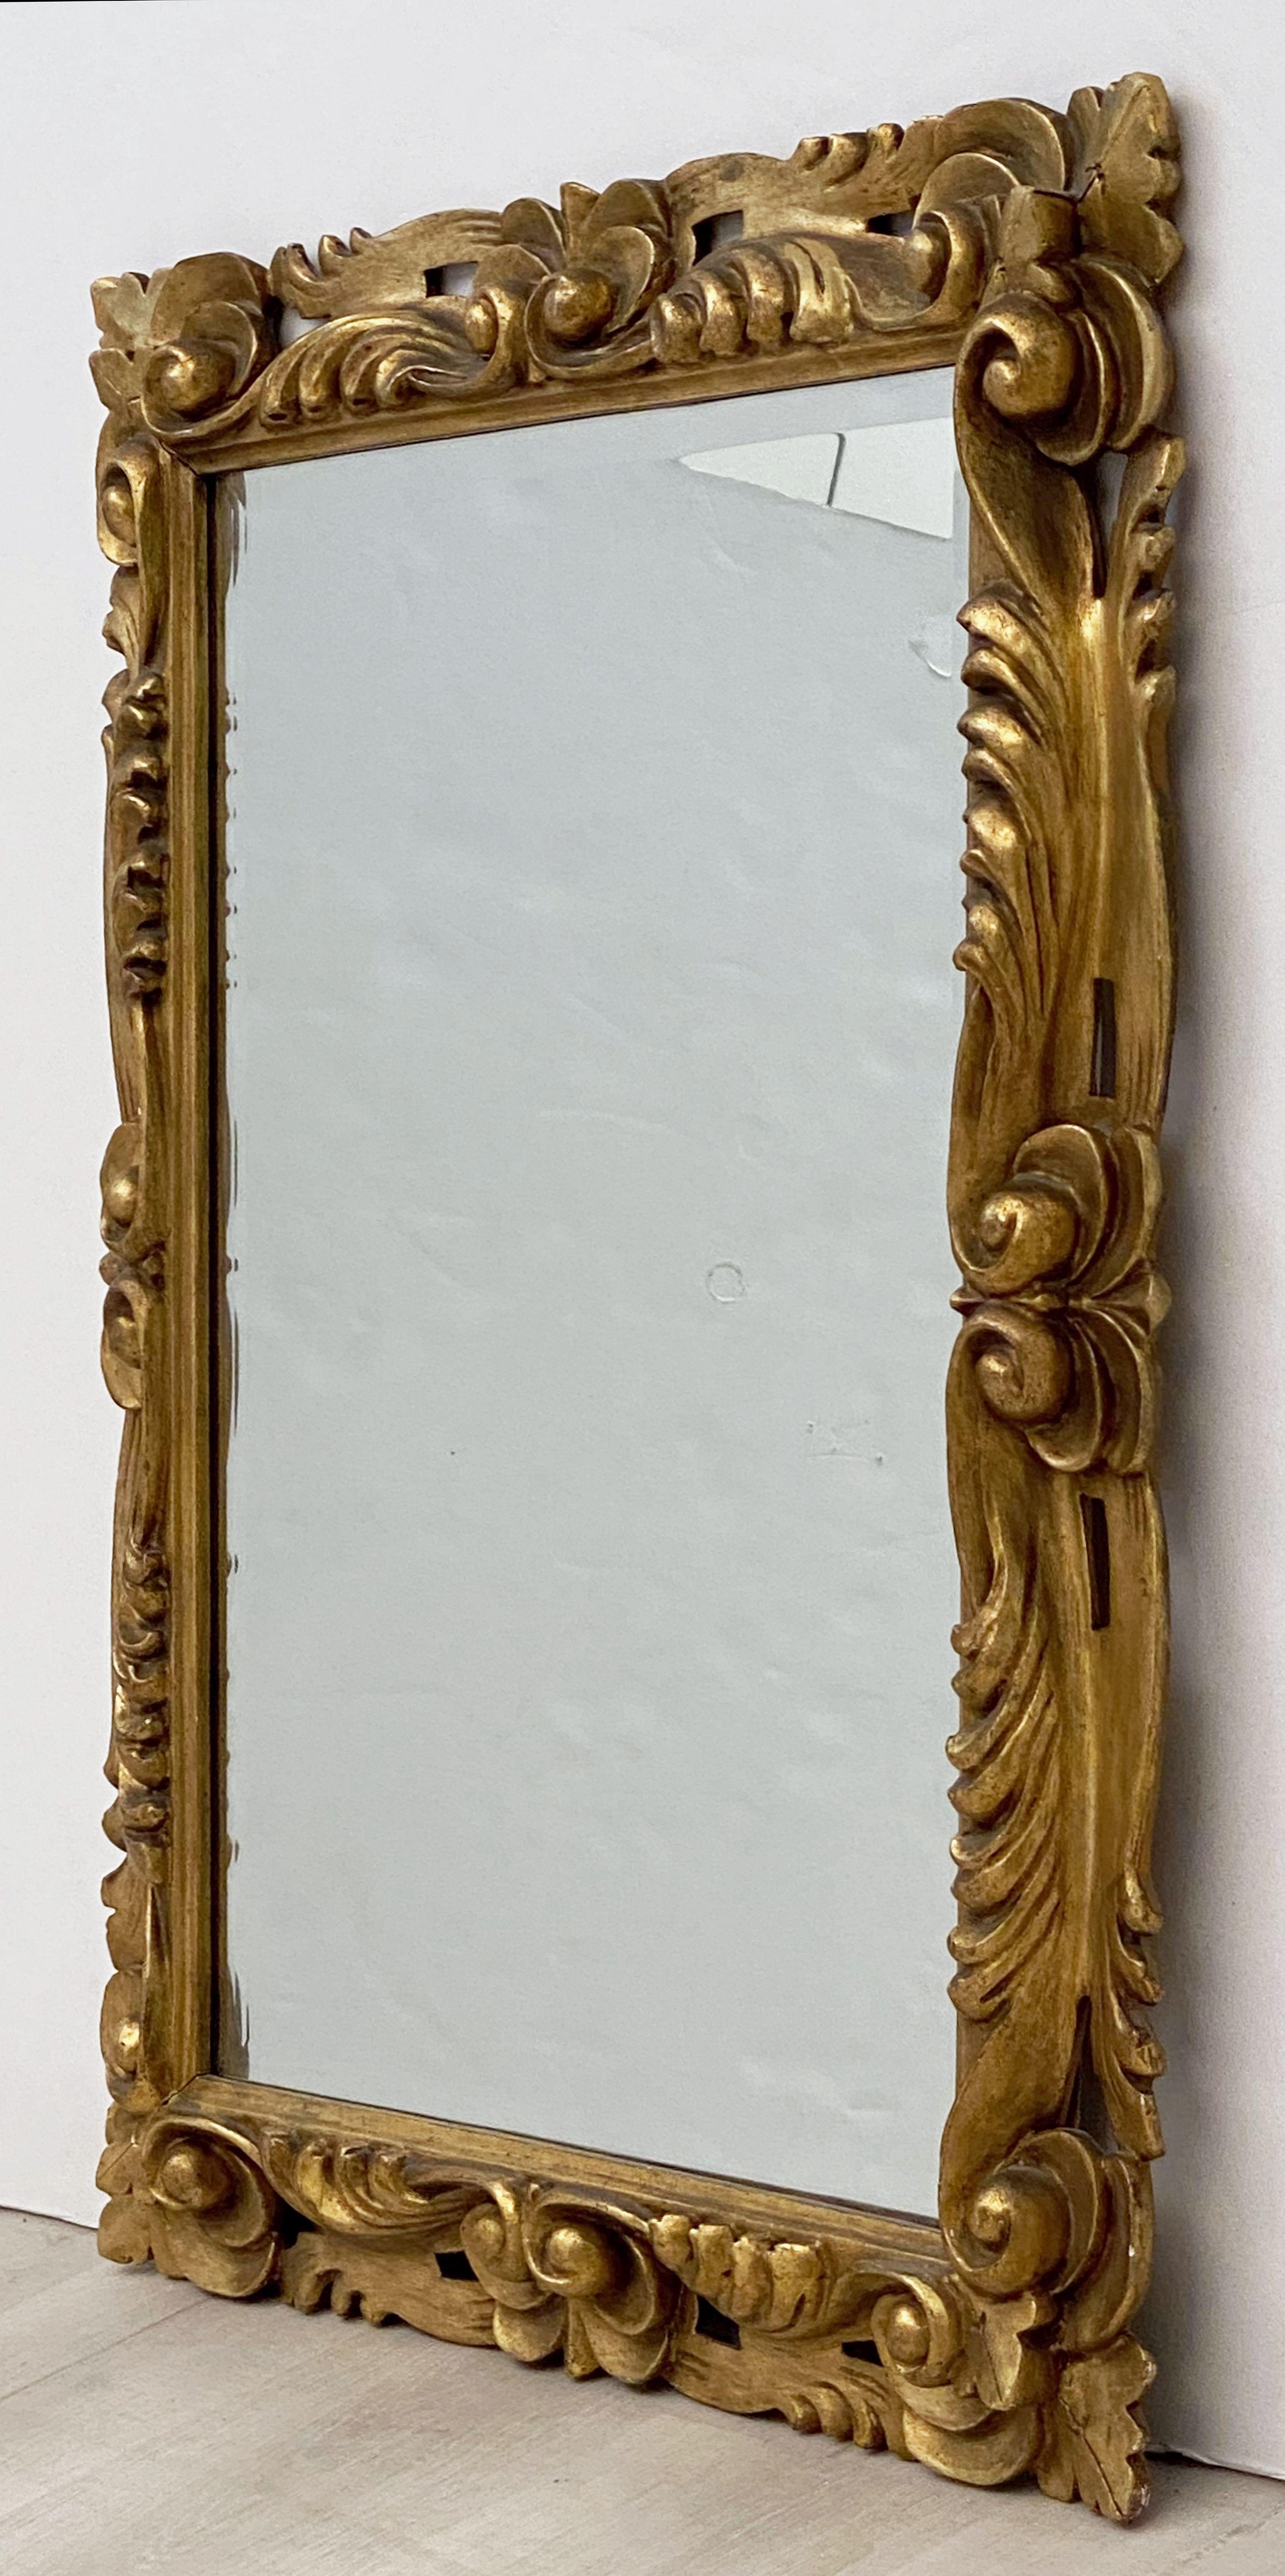 Italian Rococo Rectangular Beveled Mirror with Carved Gilt Frame (H 29 x W 23) In Good Condition For Sale In Austin, TX